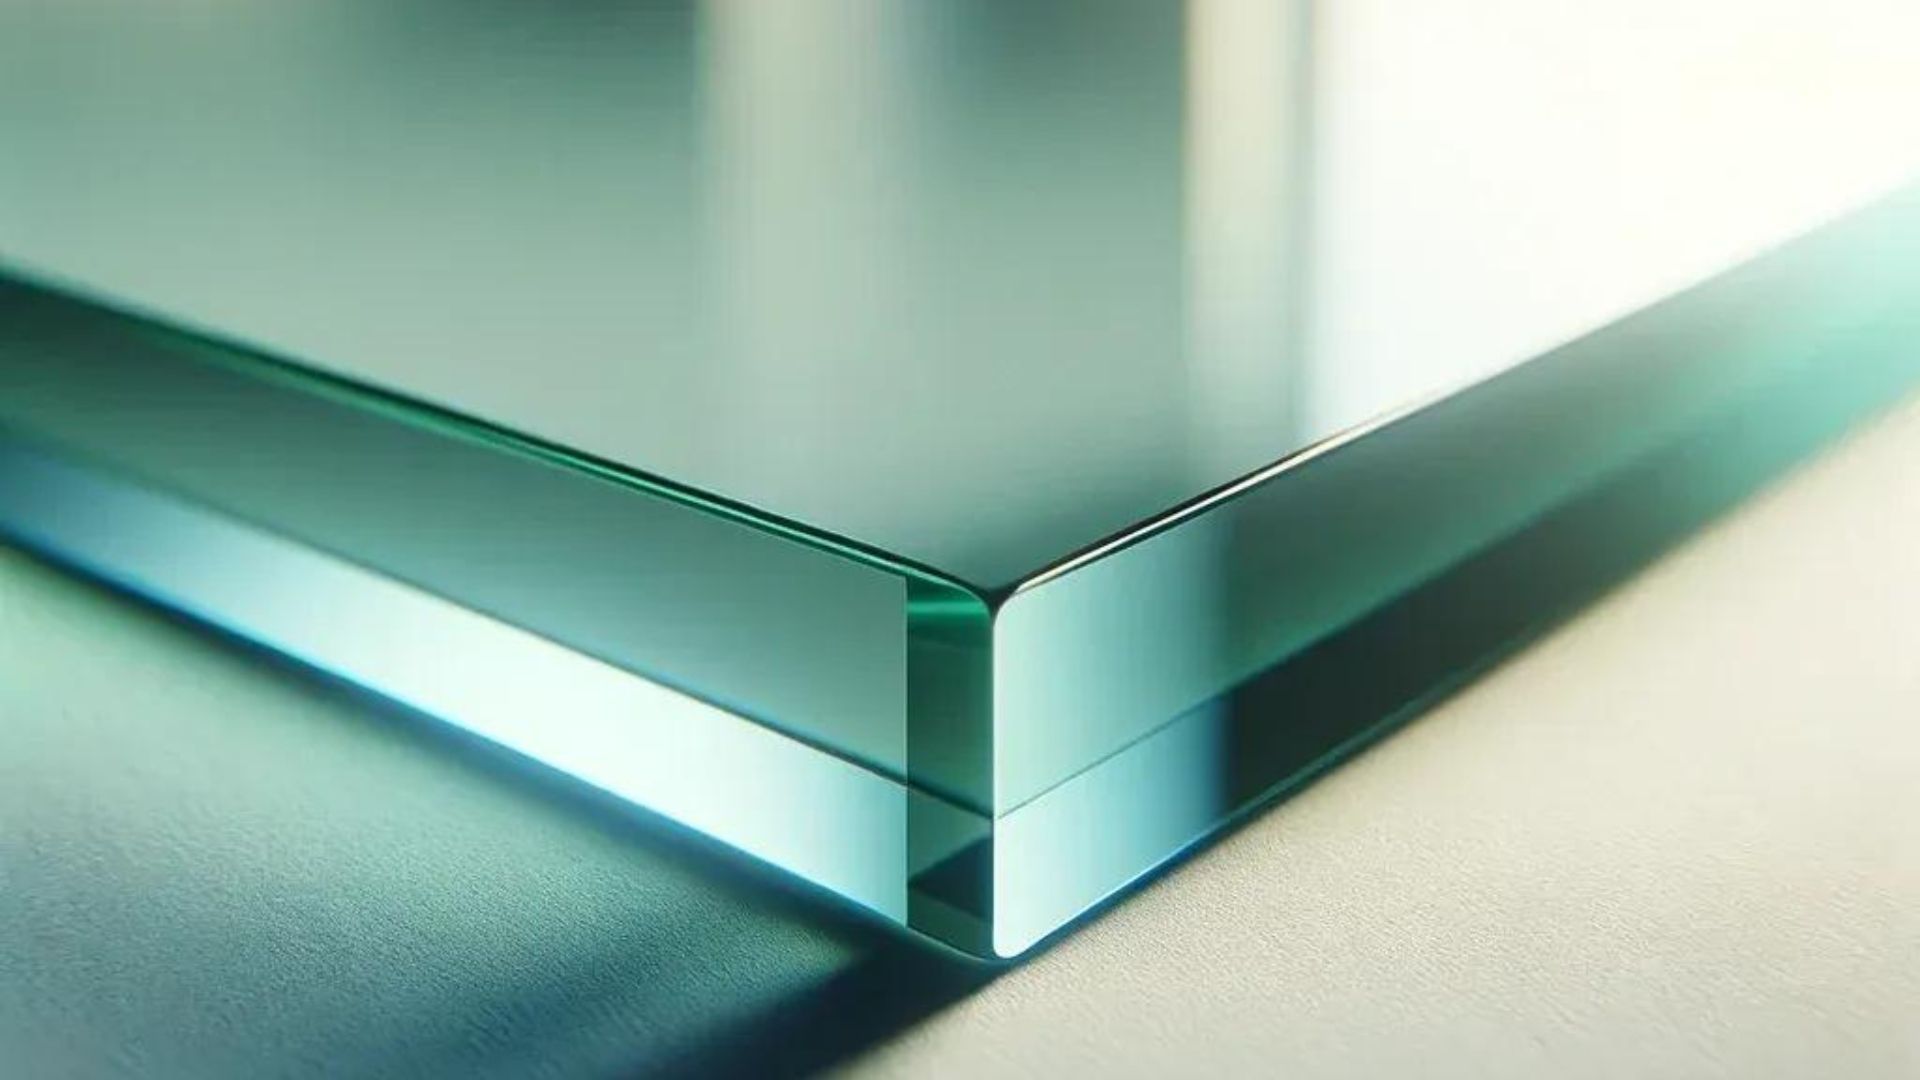 Do you know your PVB from your SGP? No? You're not alone. Learn about the three most common types of laminated glass interlayers.
